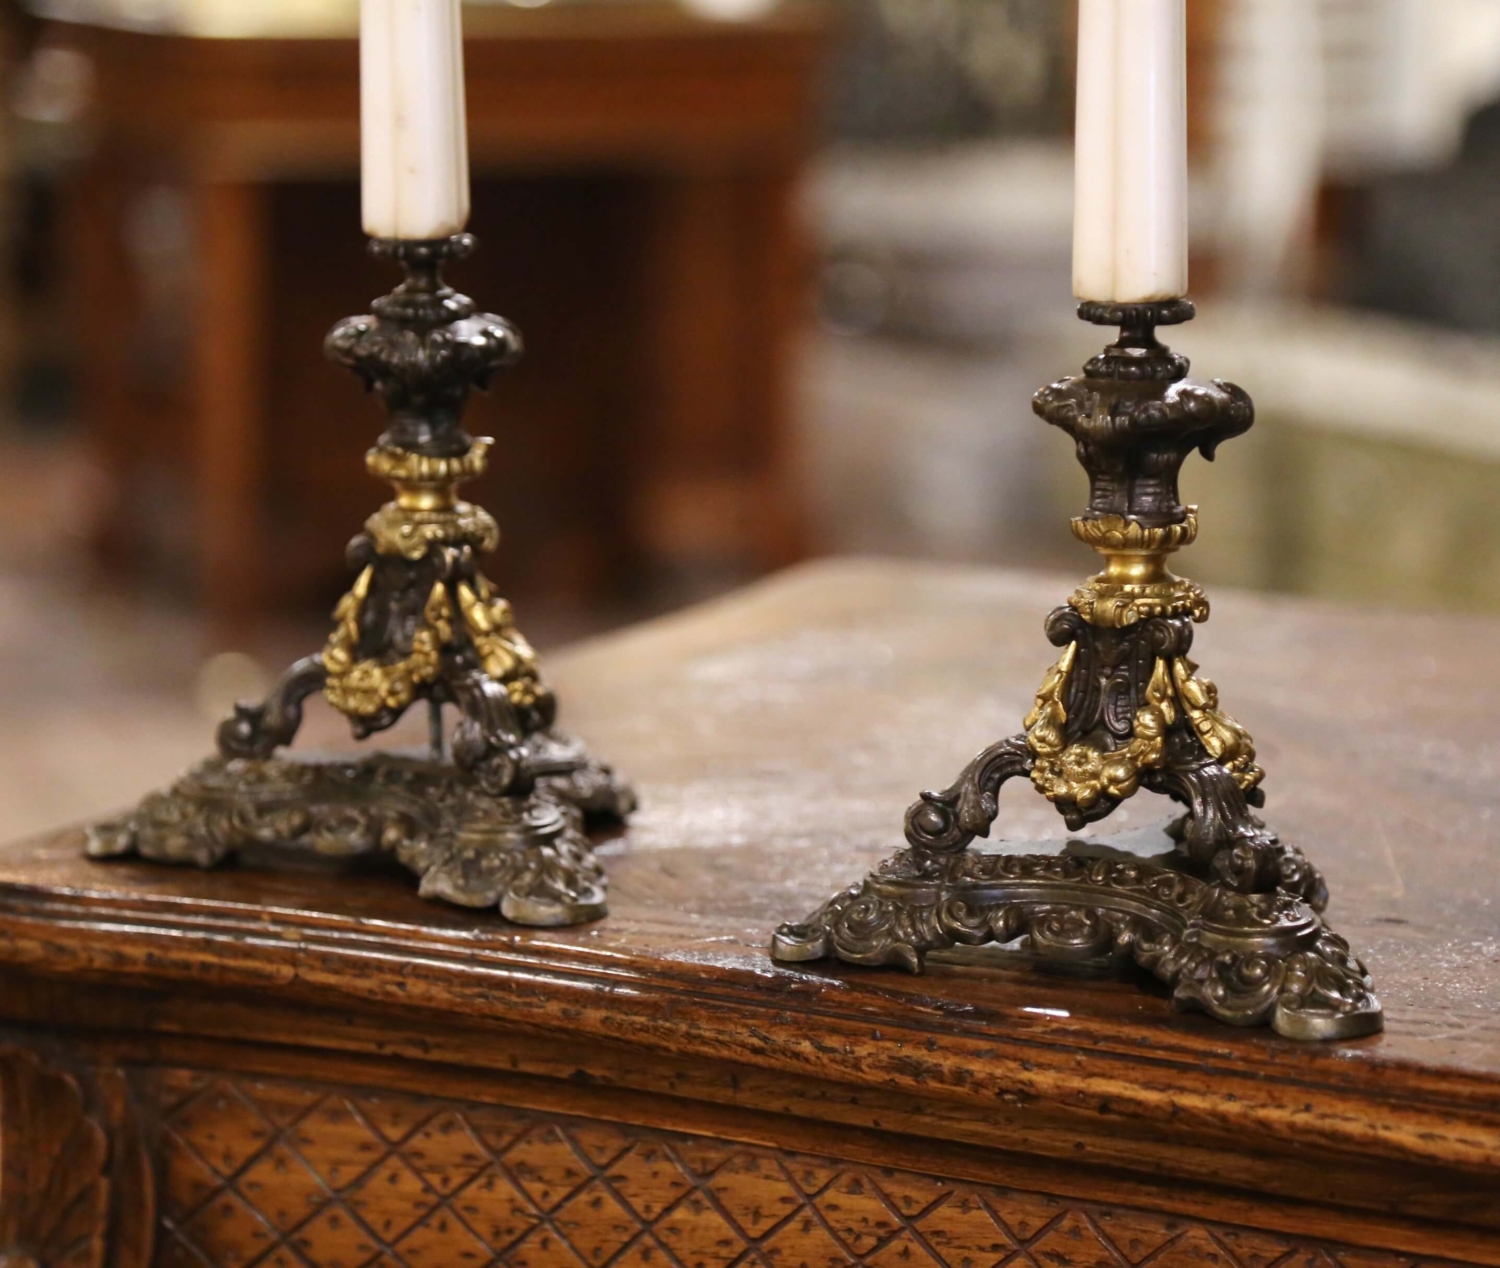 Pair of 19th Century French Napoleon III Bronze and Marble Candlesticks -  Country French Interiors